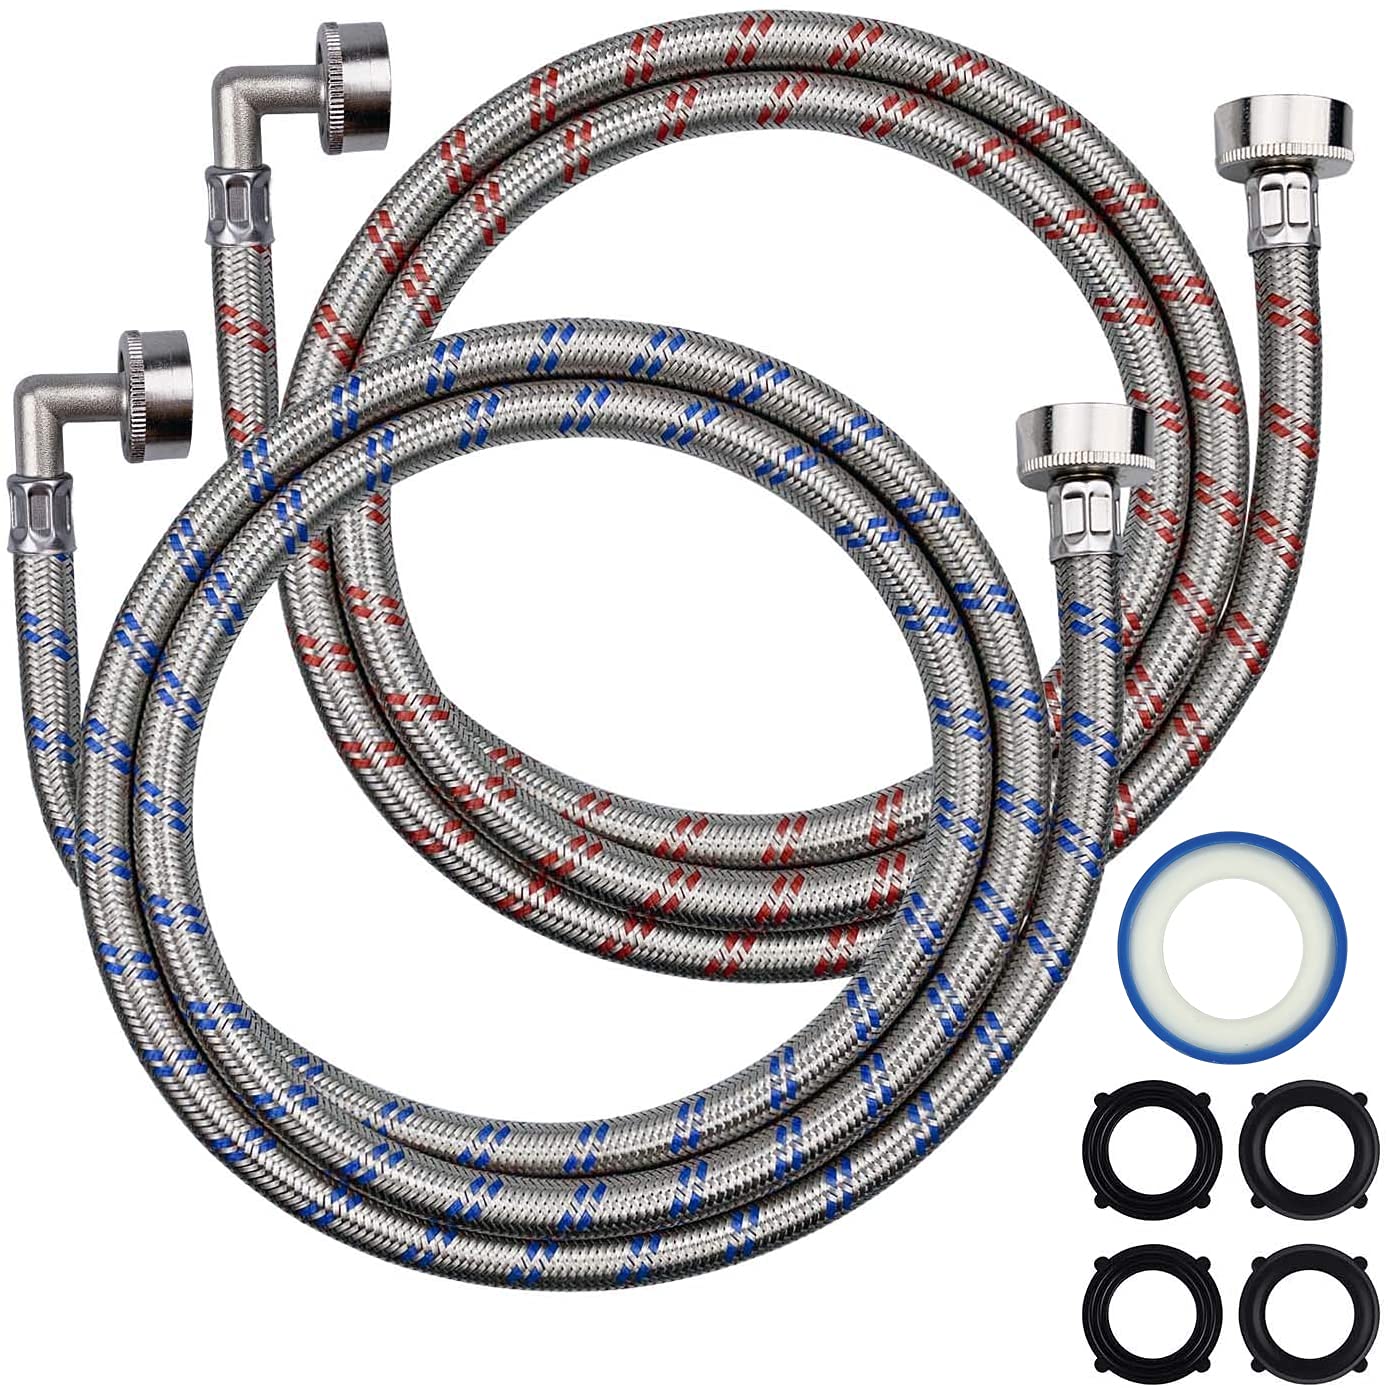 Need New Hoses for Your Washing Machine. Find Quality Parts Locally or Online With This Guide